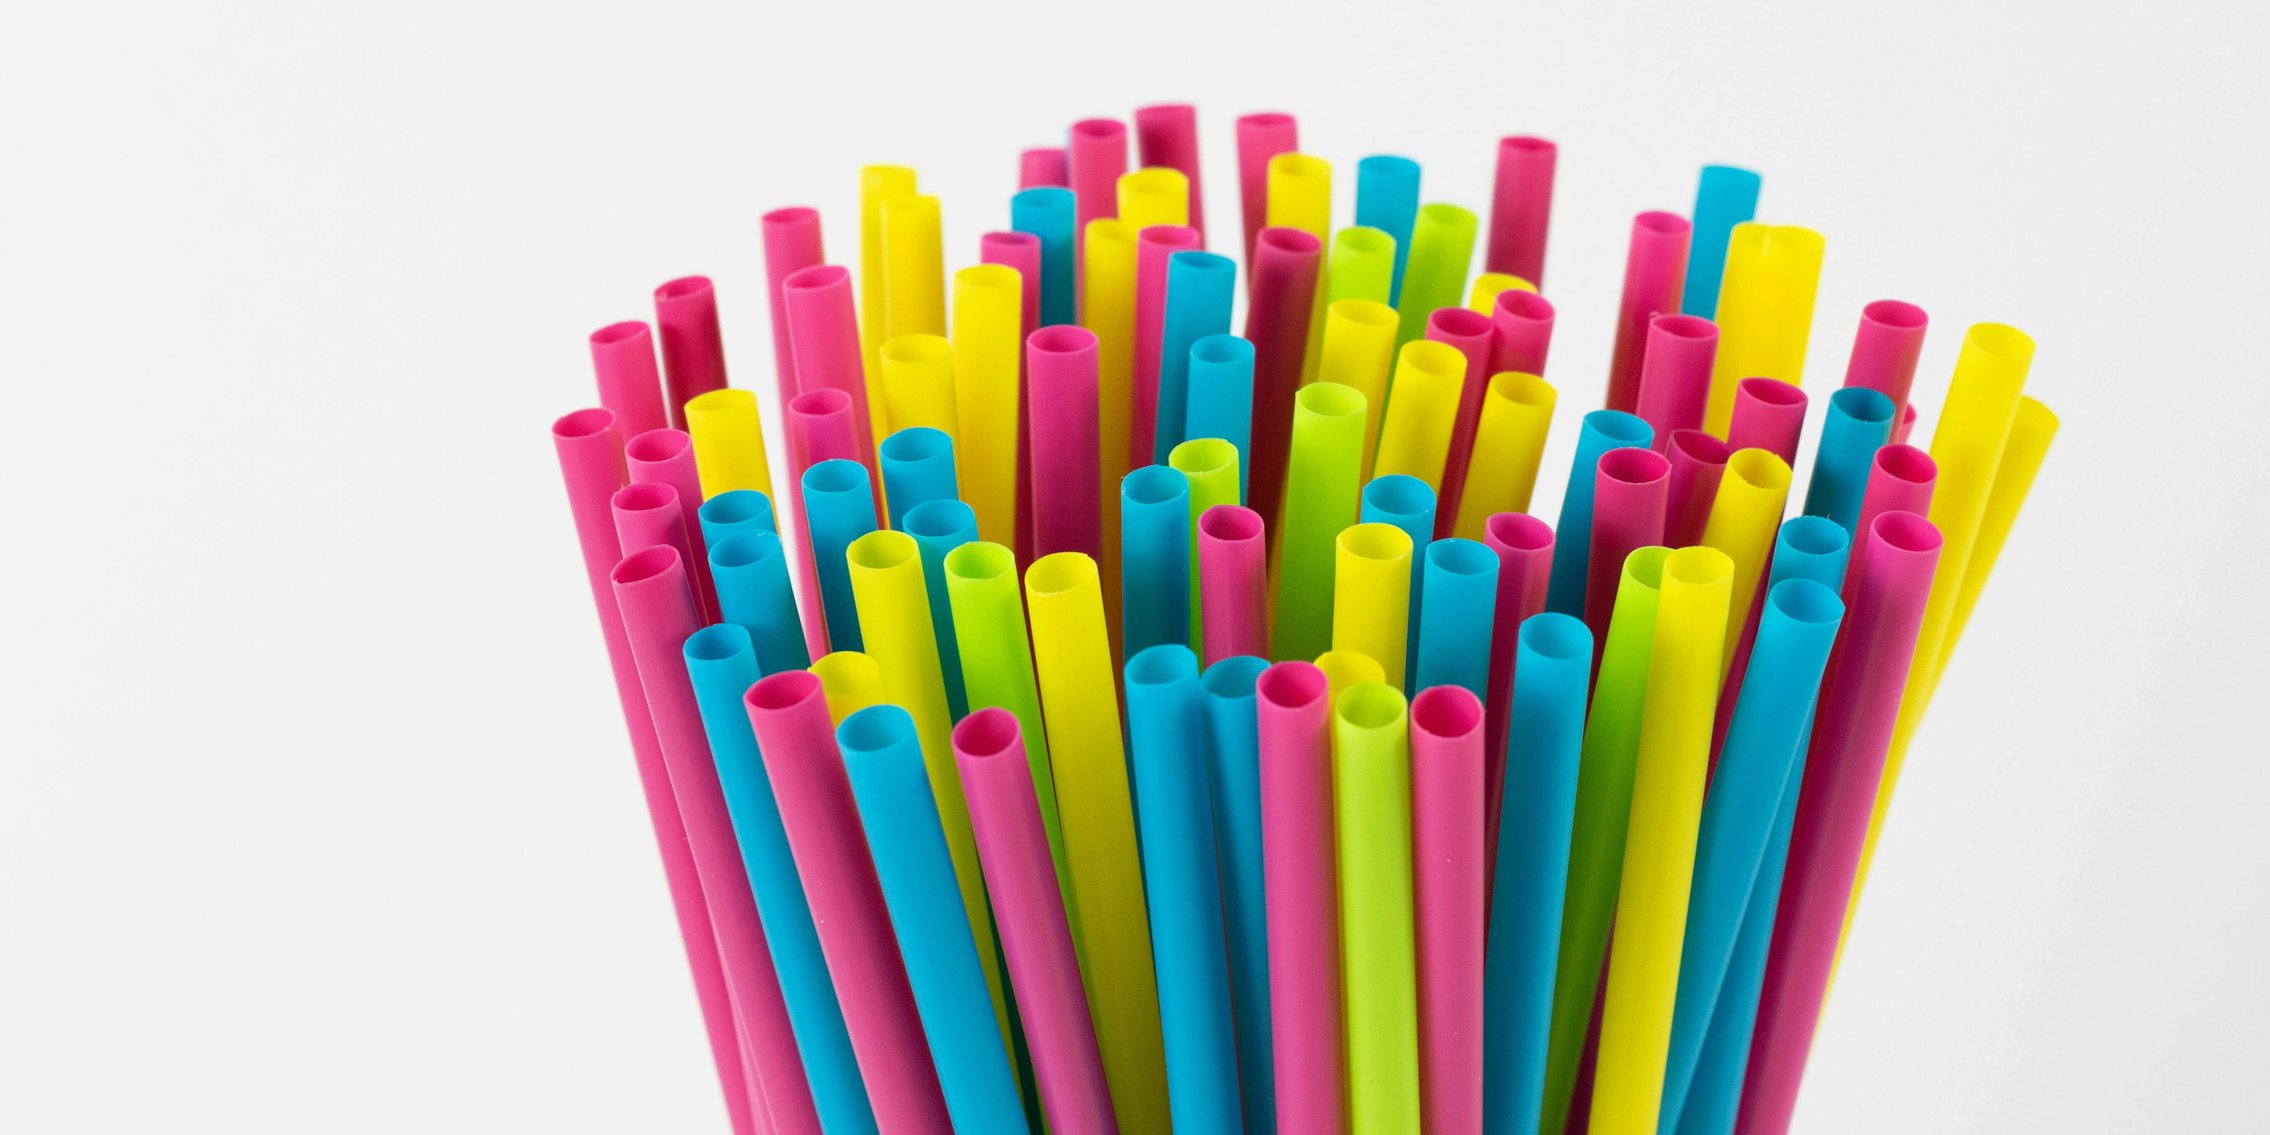 A stack of colorful plastic straws